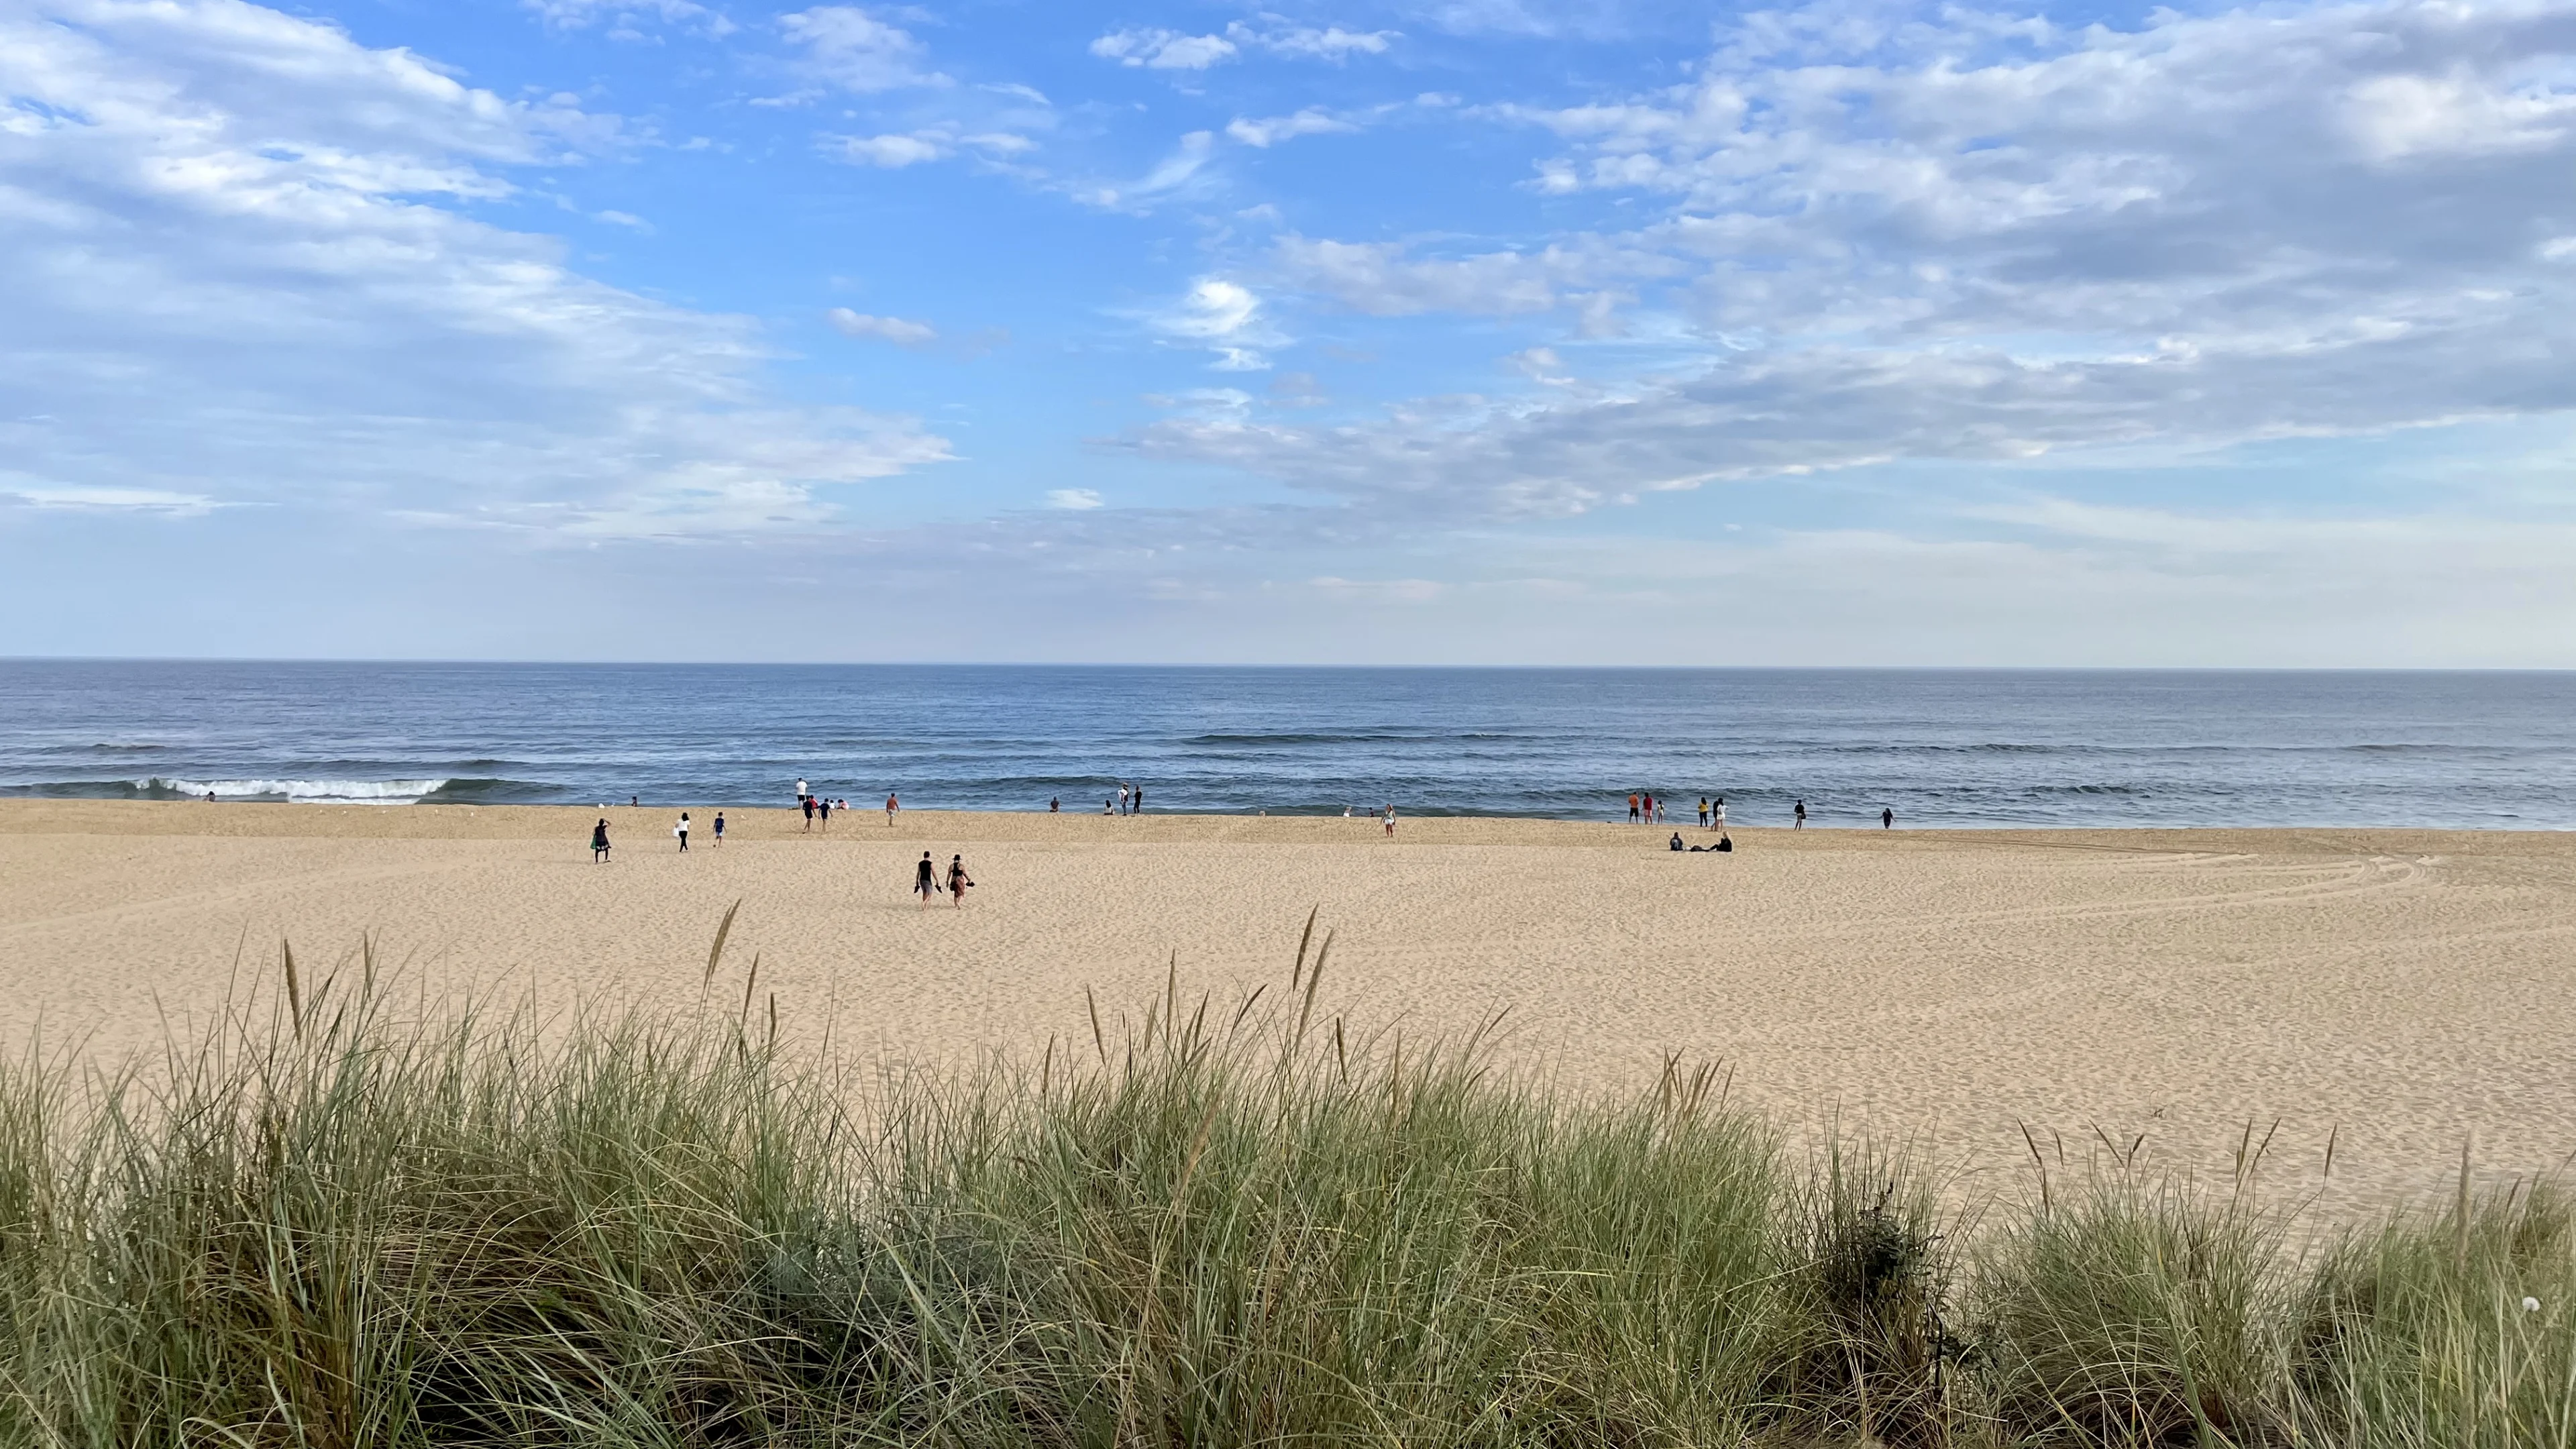 A view of the main beach at Lakes Entrance with blue skies.